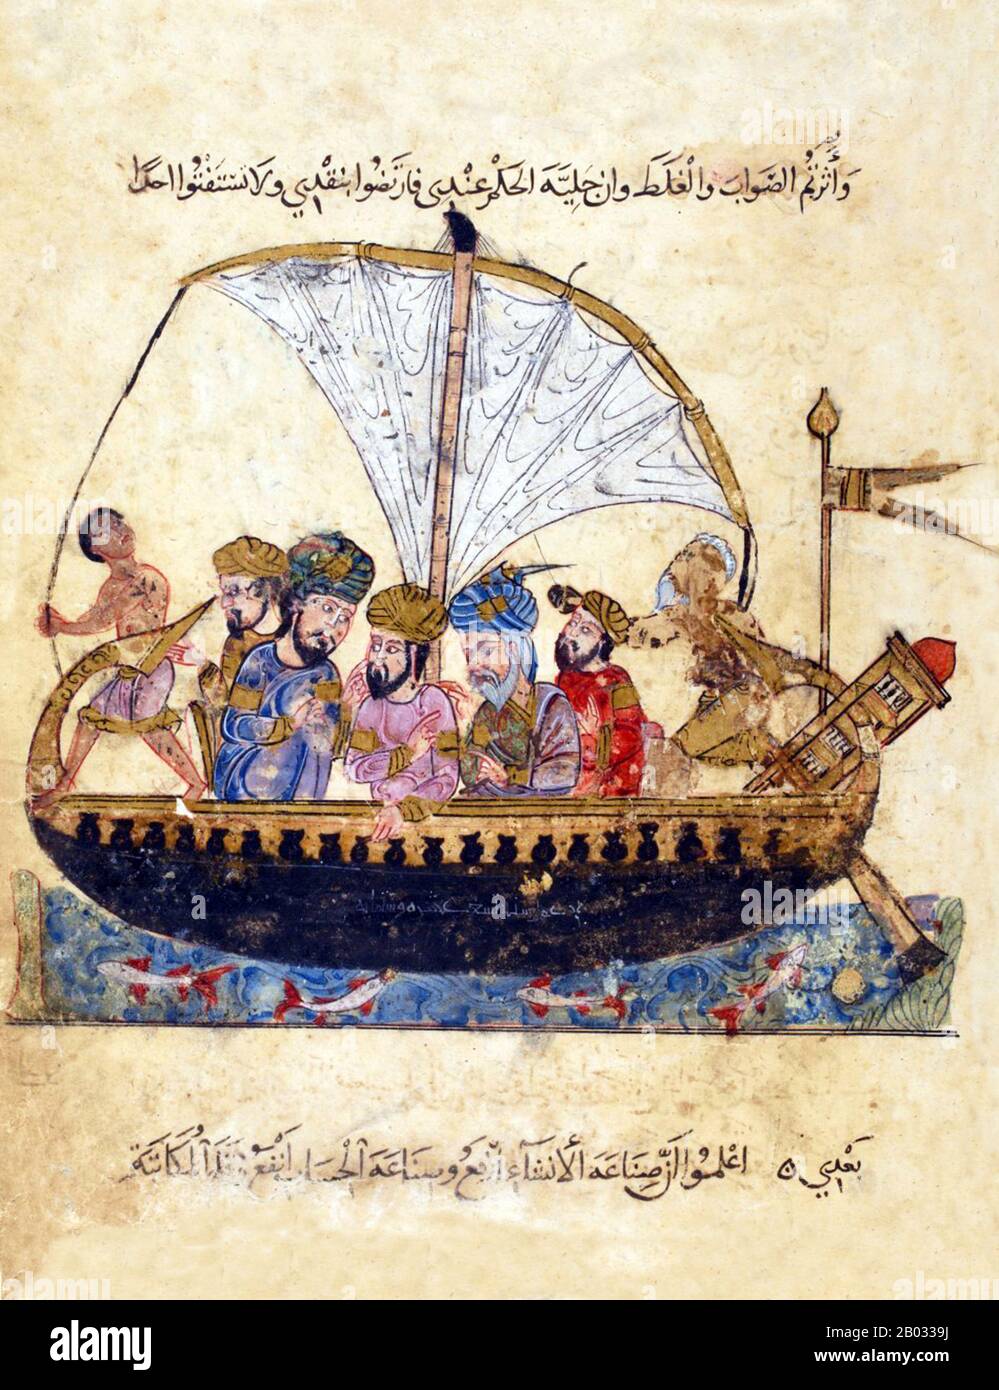 The ‘Maqama’ are a collection of picaresque Arabic tales written in the form of rhymed prose in which rhetorical extravagance is conspicuous. The style was invented in the 10th century by Badi al-Zaman al-Hamadhani and extended by Abu Muhammed al-Qasim ibn Ali al-Hariri of Basra the following century.  The protagonists in the tales are invariably silver-tongued hustlers, especially the roguish Abu Zaid al-Saruji, who trick the narrator and who live on their wits and dazzle onlookers with displays of acrobatics, acting and by reciting poetry. Stock Photo